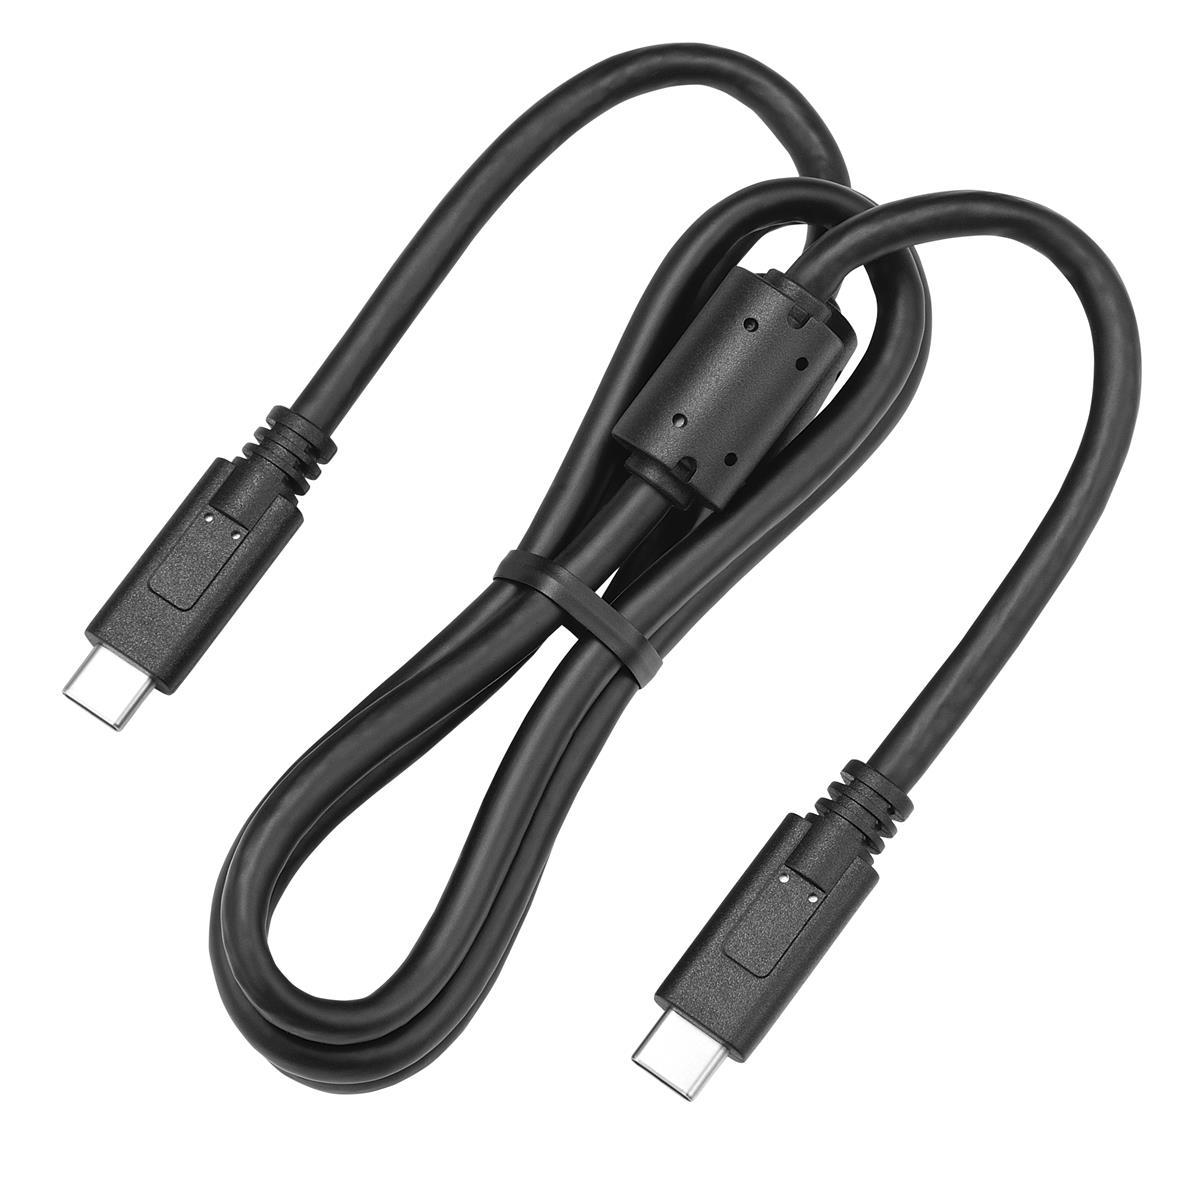 Photos - Cable (video, audio, USB) Olympus OM SYSTEM CB-USB13 USB Connection Cable V3351200W000 